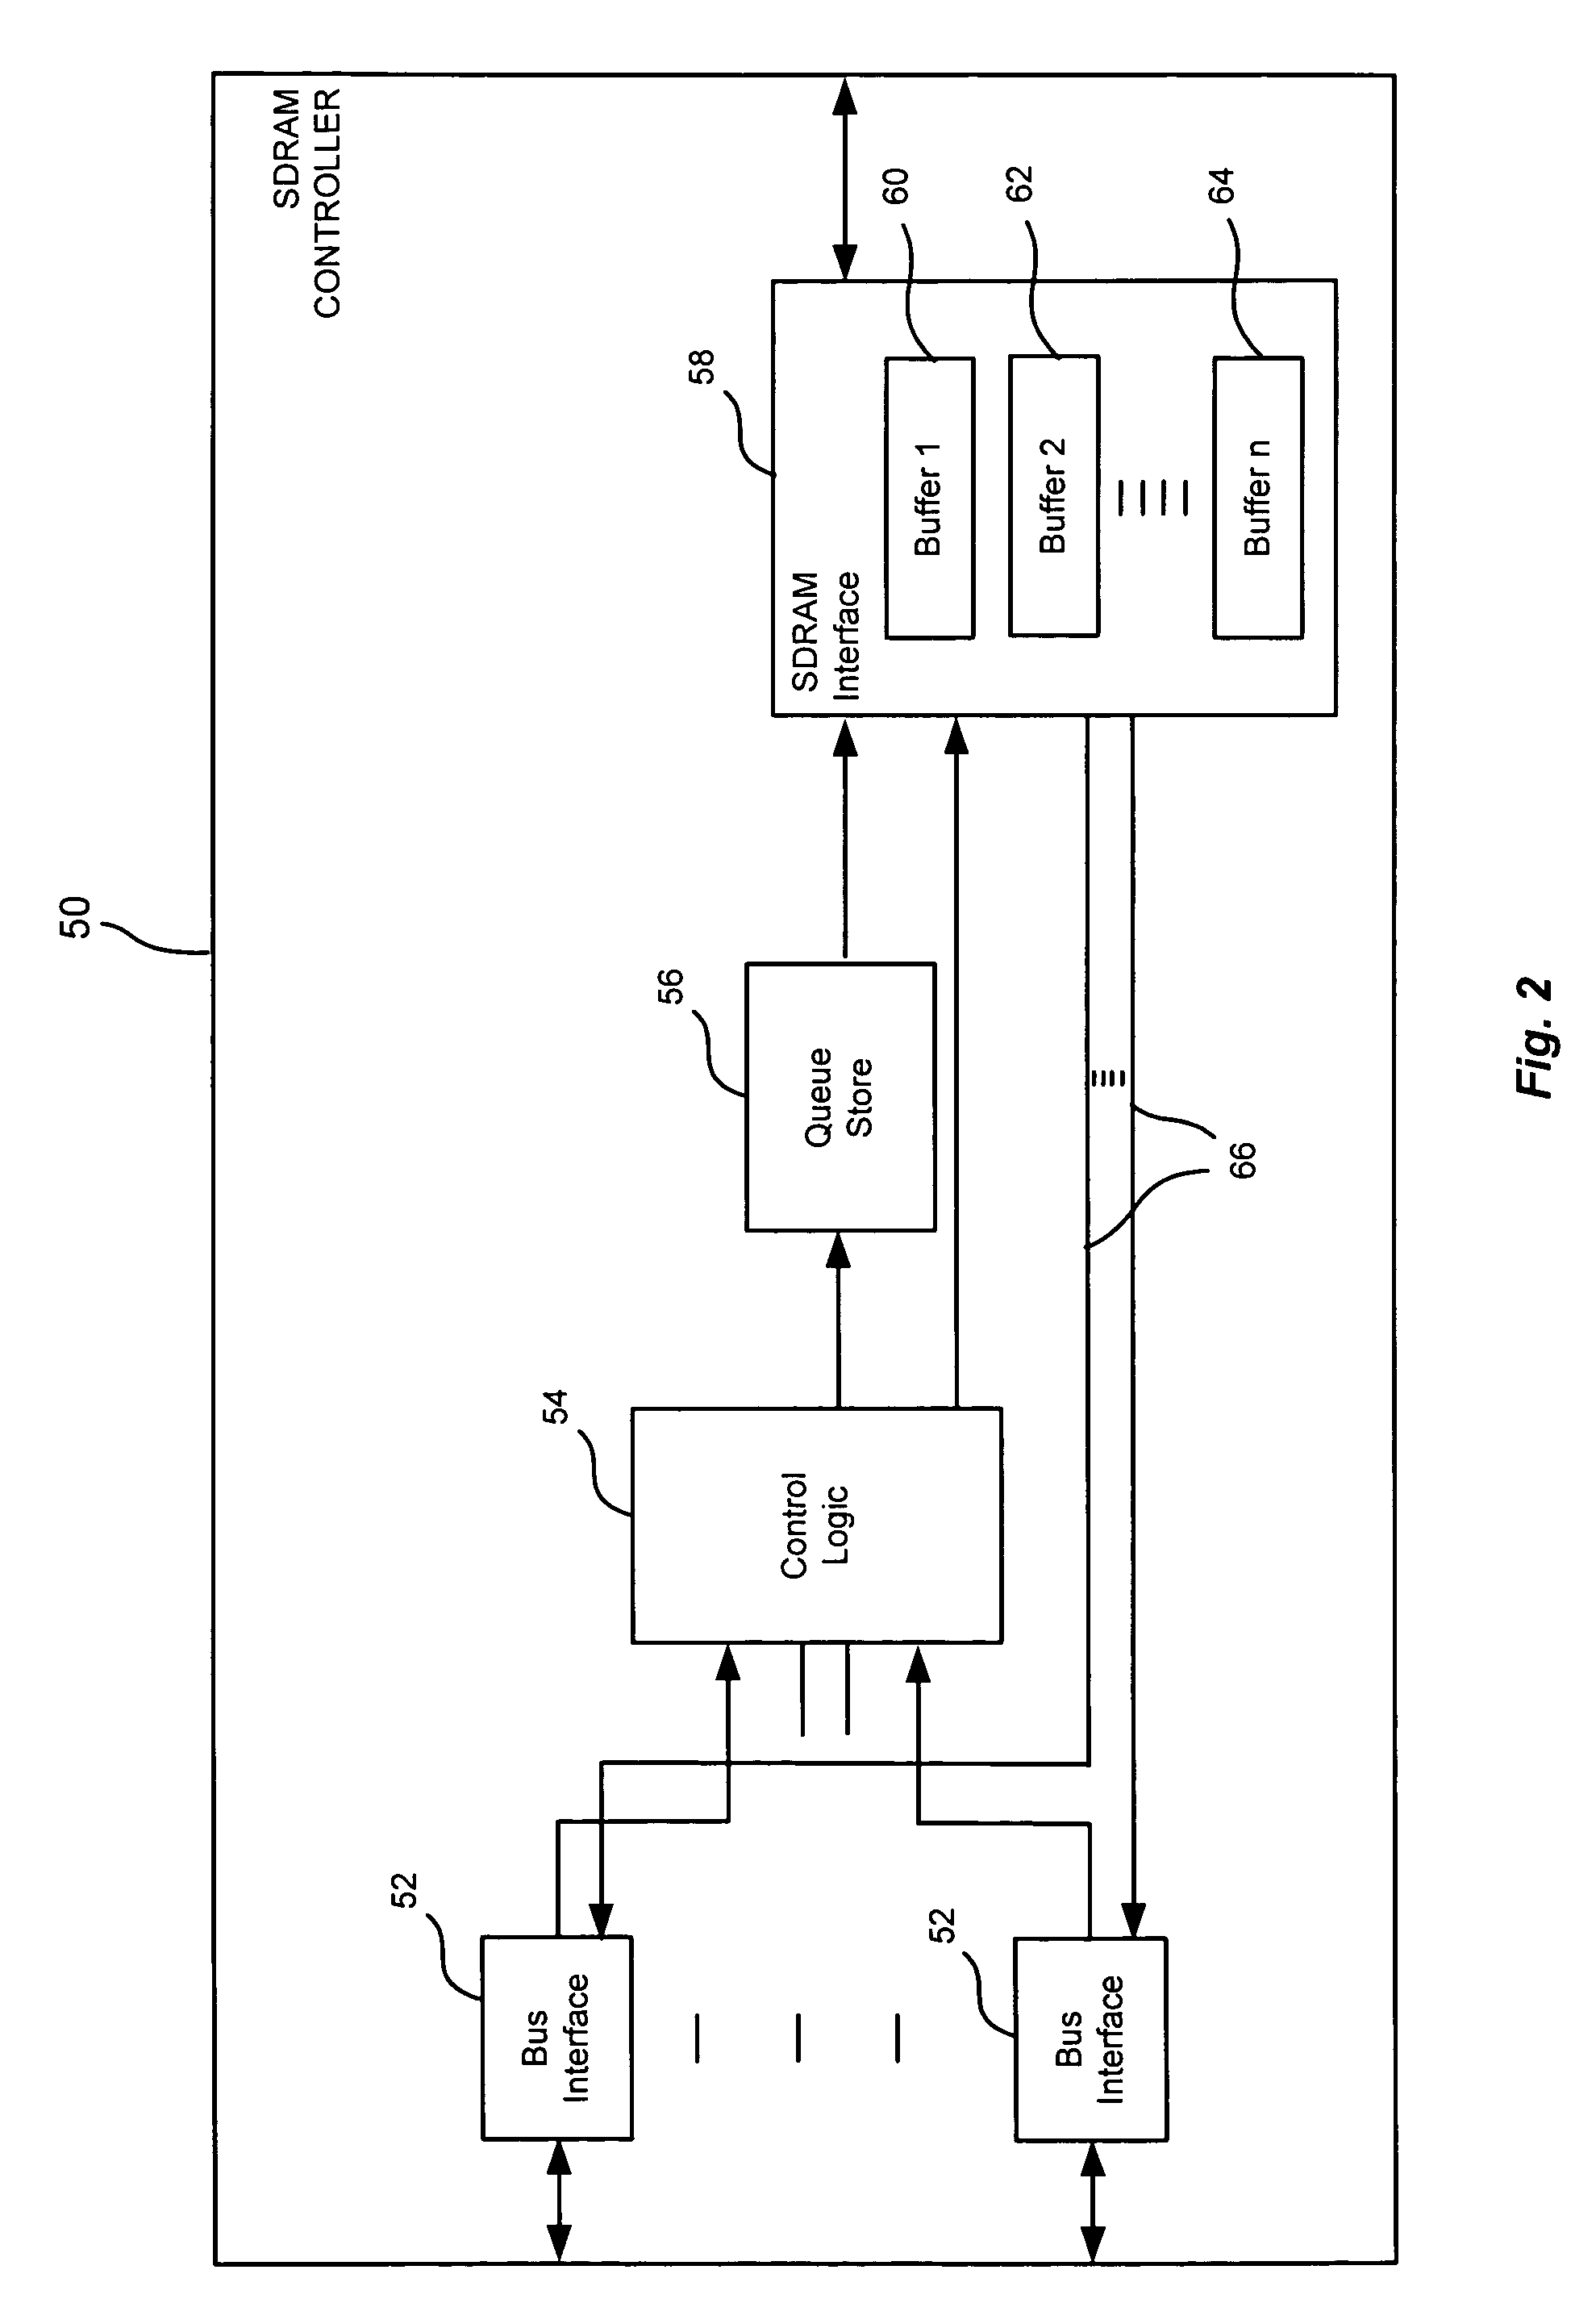 Memory controller having a buffer for providing beginning and end data